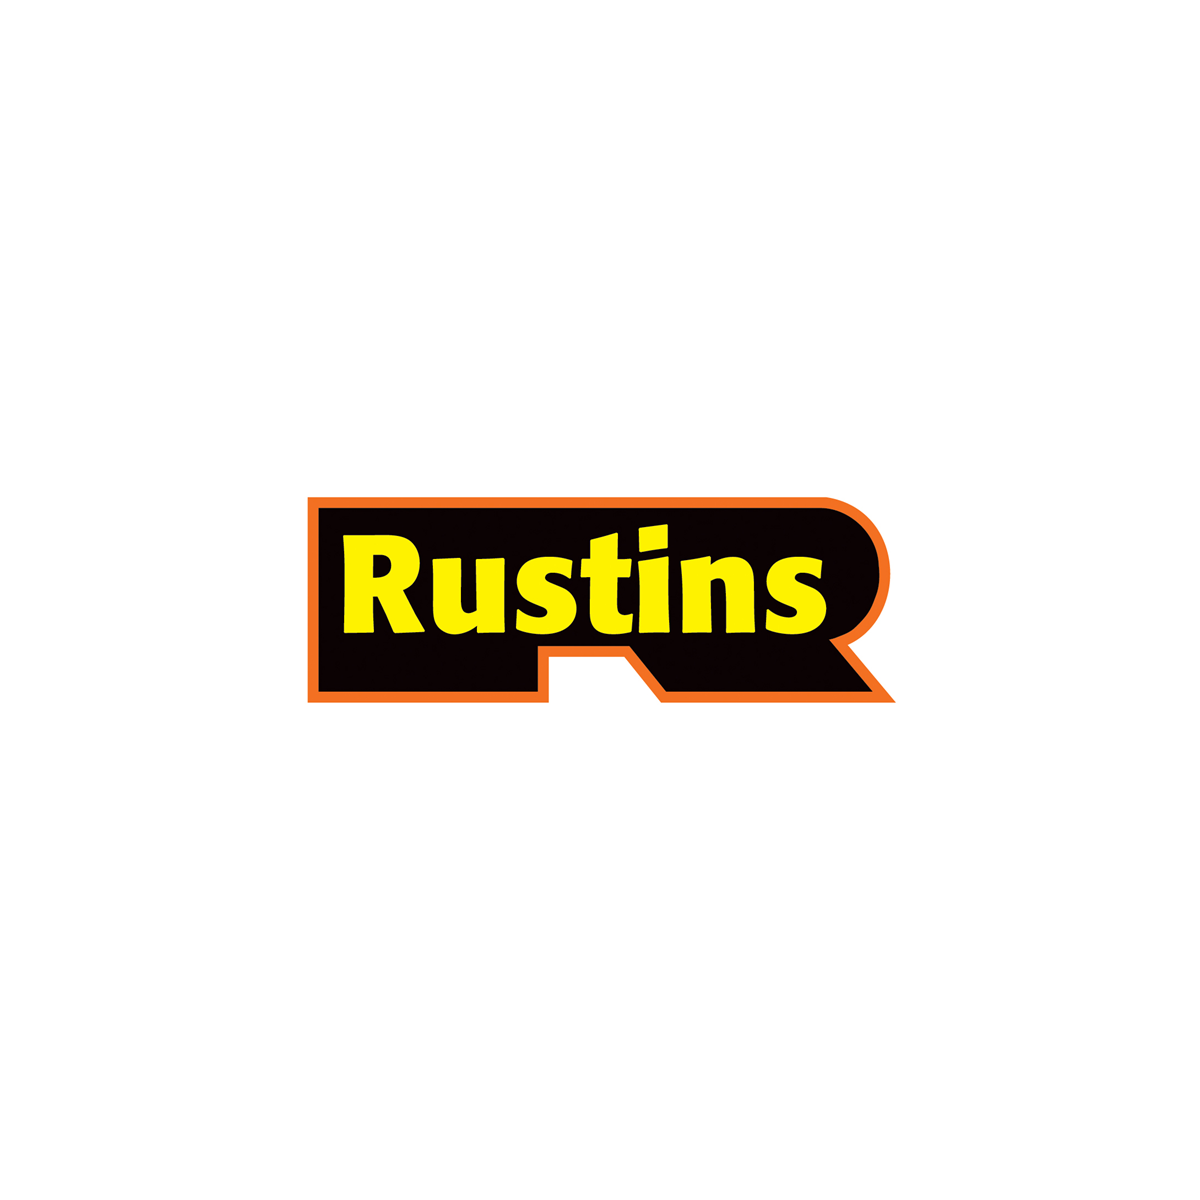 Where to buy Rustins ASAP Paint